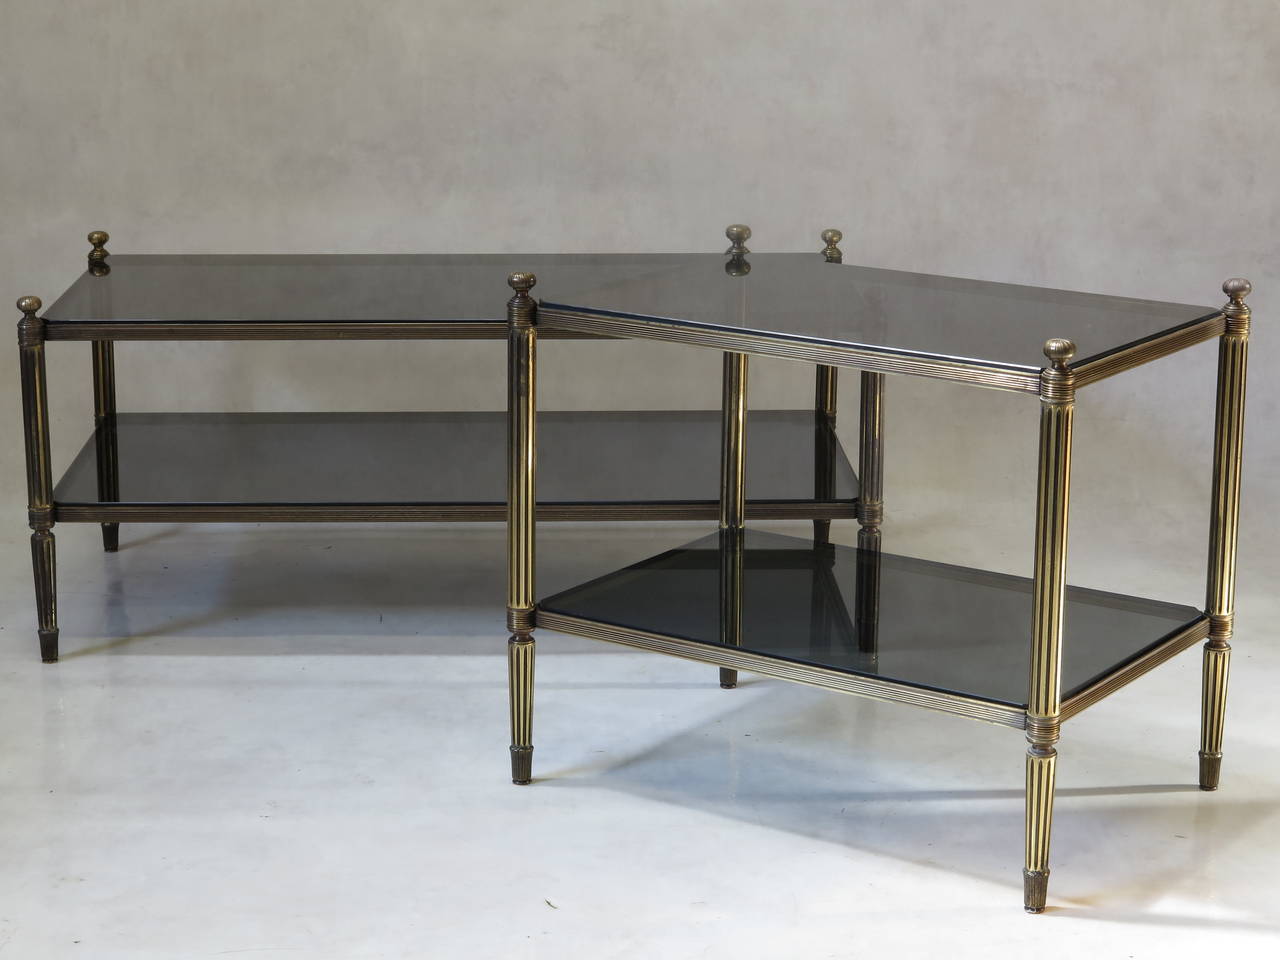 Very chic and elegant almost-pair of solid brass (or bronze) coffee tables, with smoked glass tops.

The table tops have canted corners. The top tiers are decorated at each corner with an engraved finial. Reeded legs, ending in elegant feet. The